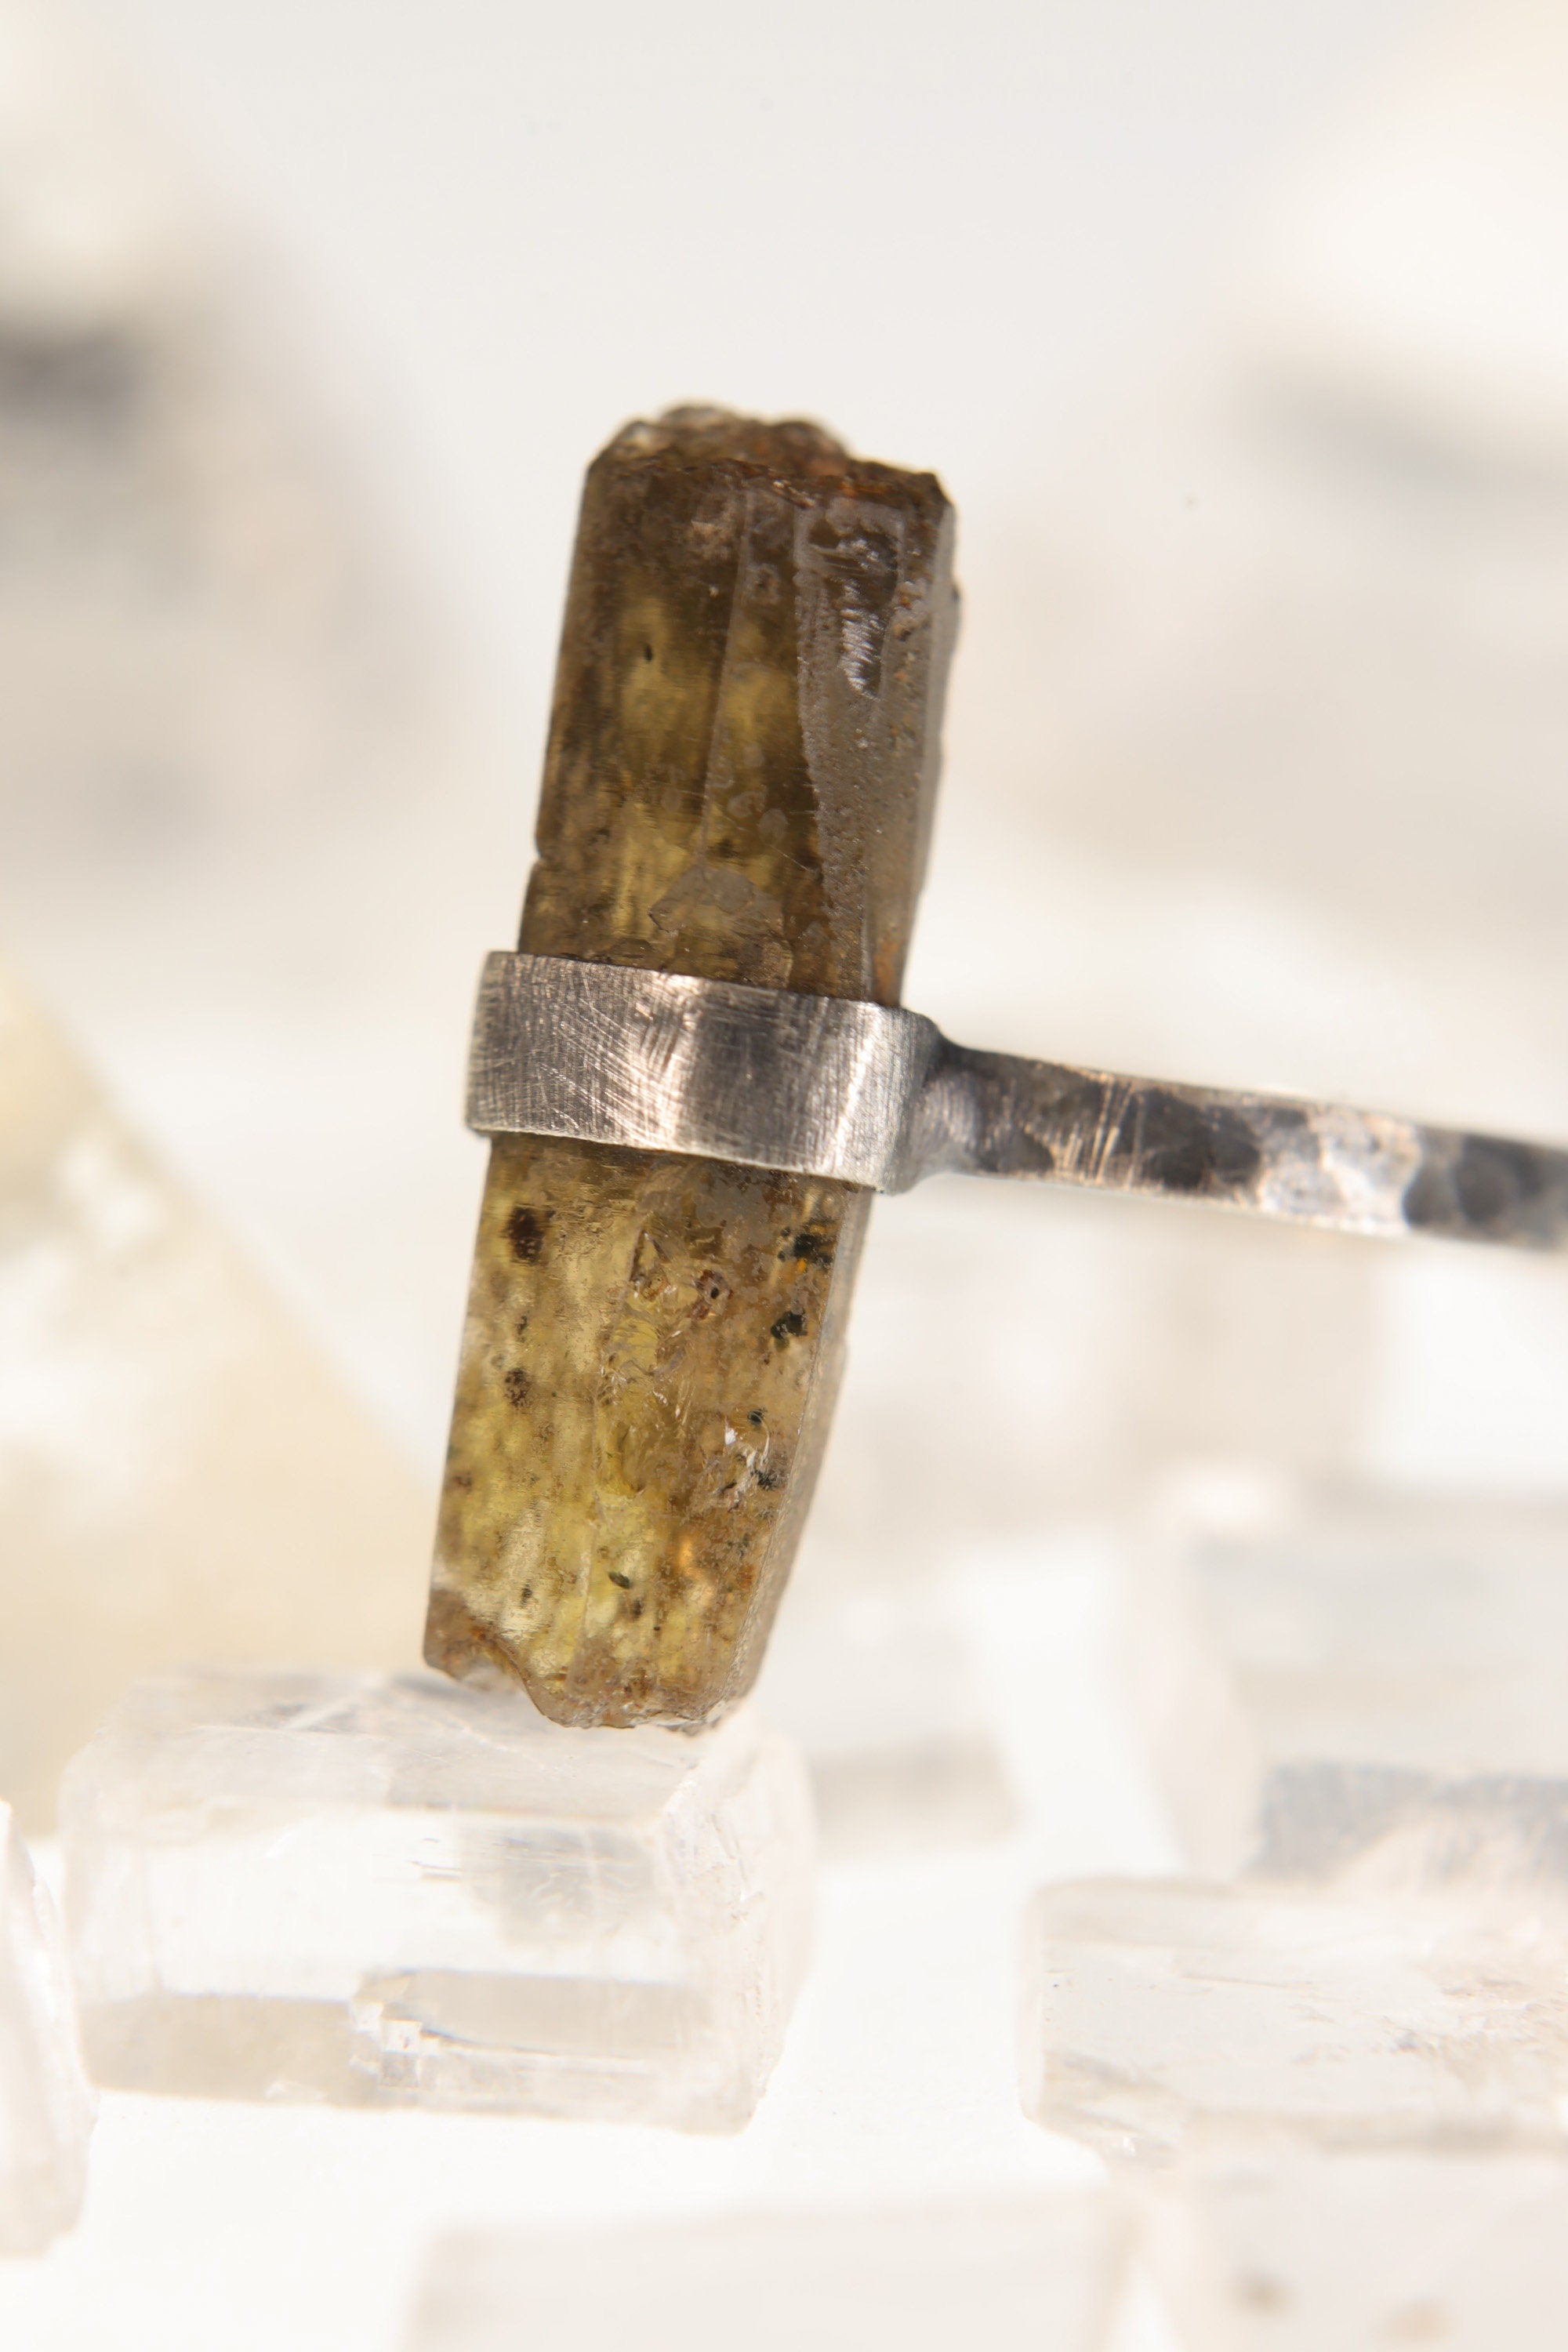 Torrington Whisper: Textured & Oxidised Sterling Silver Ring with Raw Australian Smoky Citrine - Size 7 1/2 - NO/01